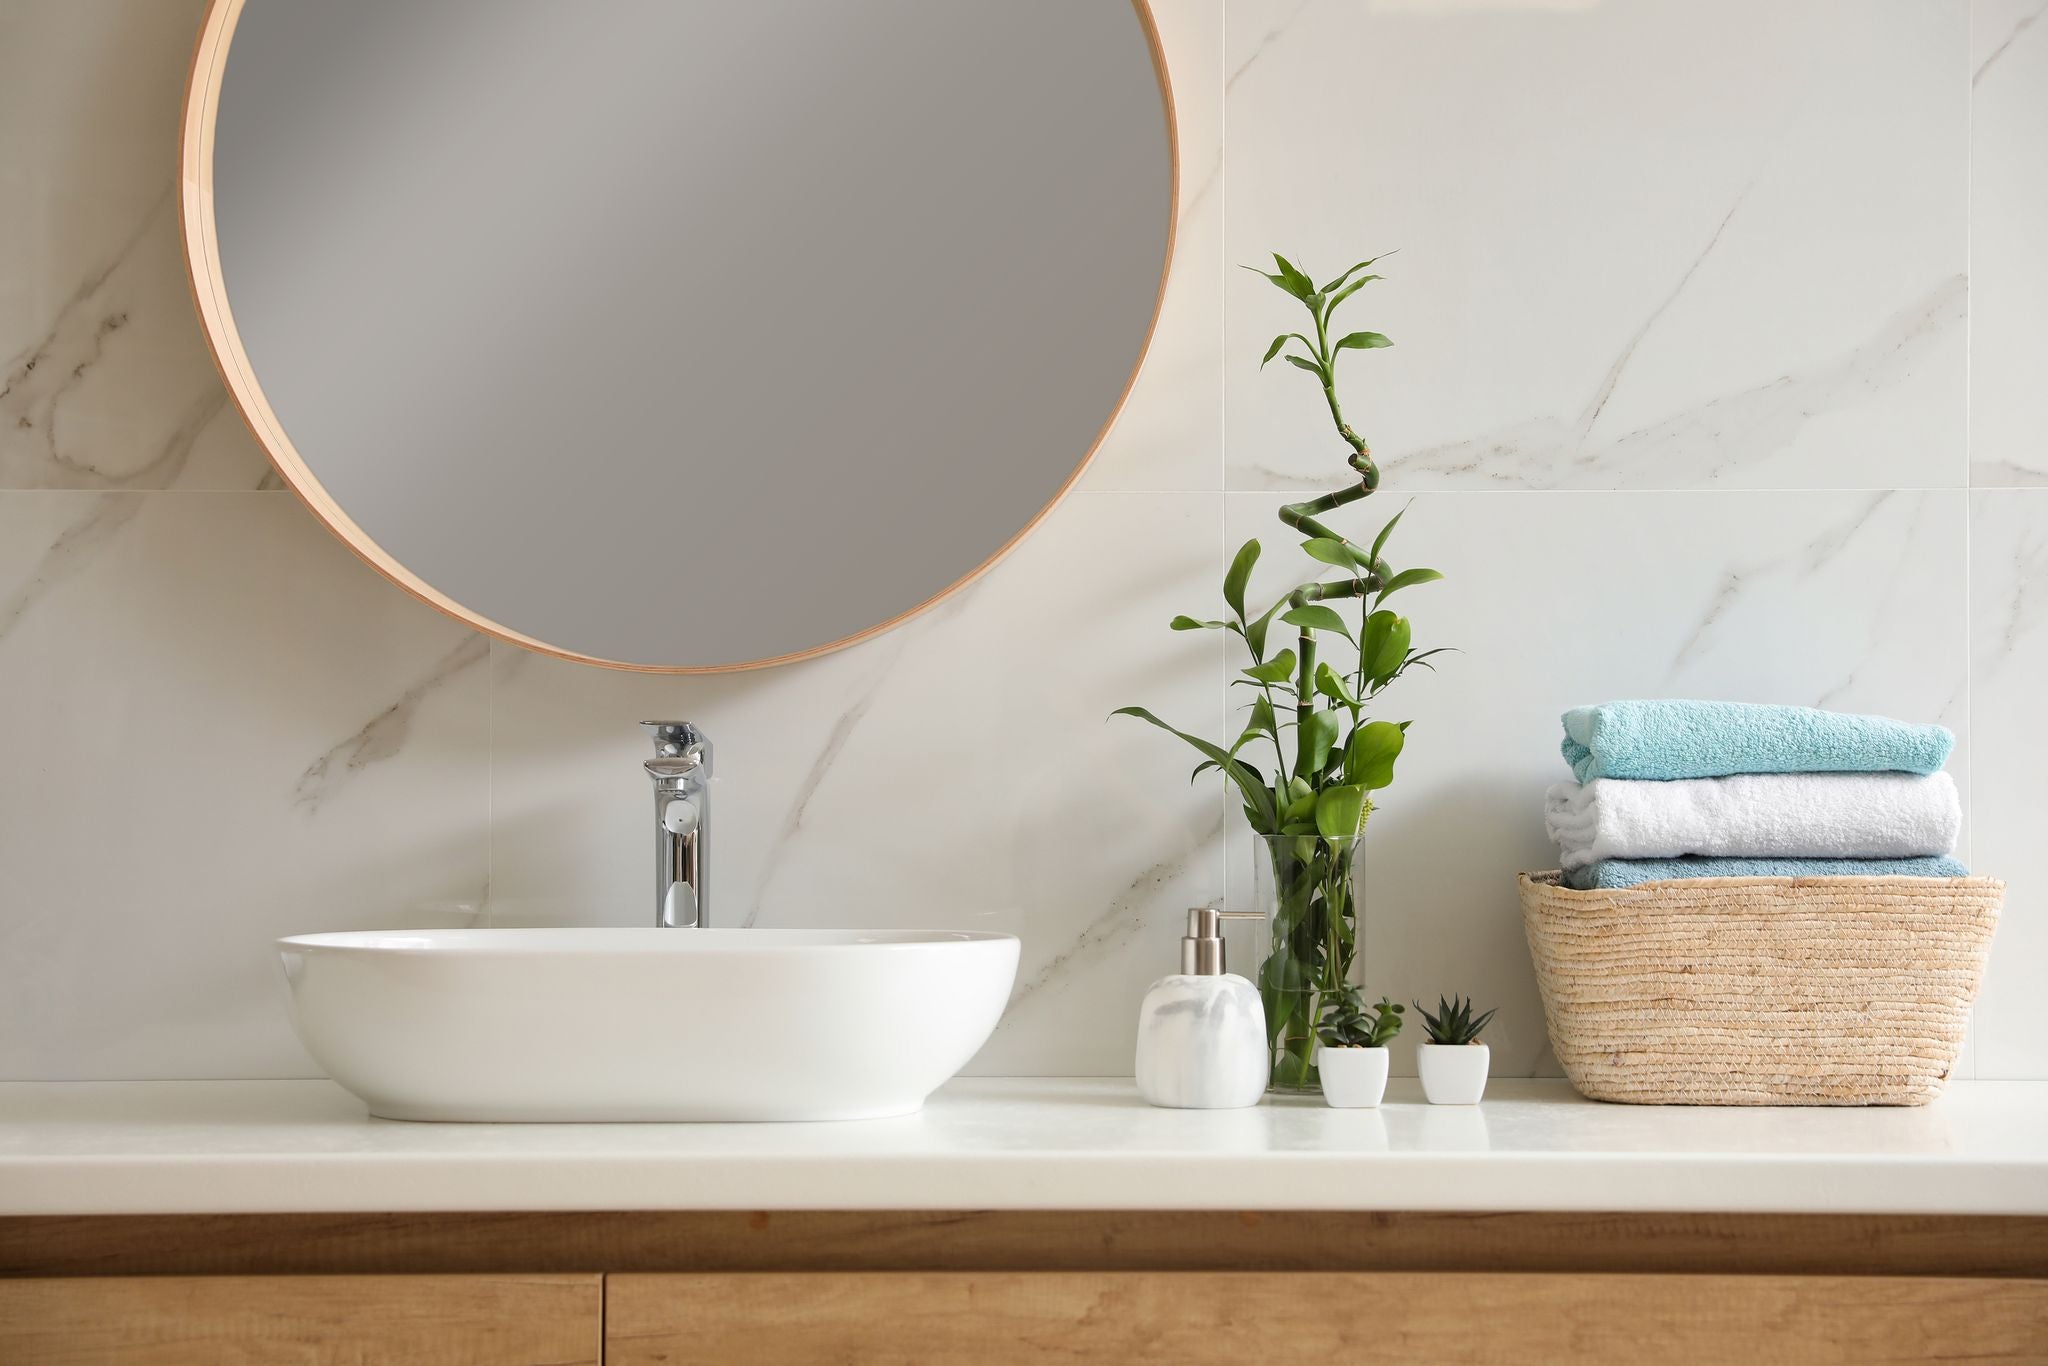 7 ways to prevent mold in the bathroom